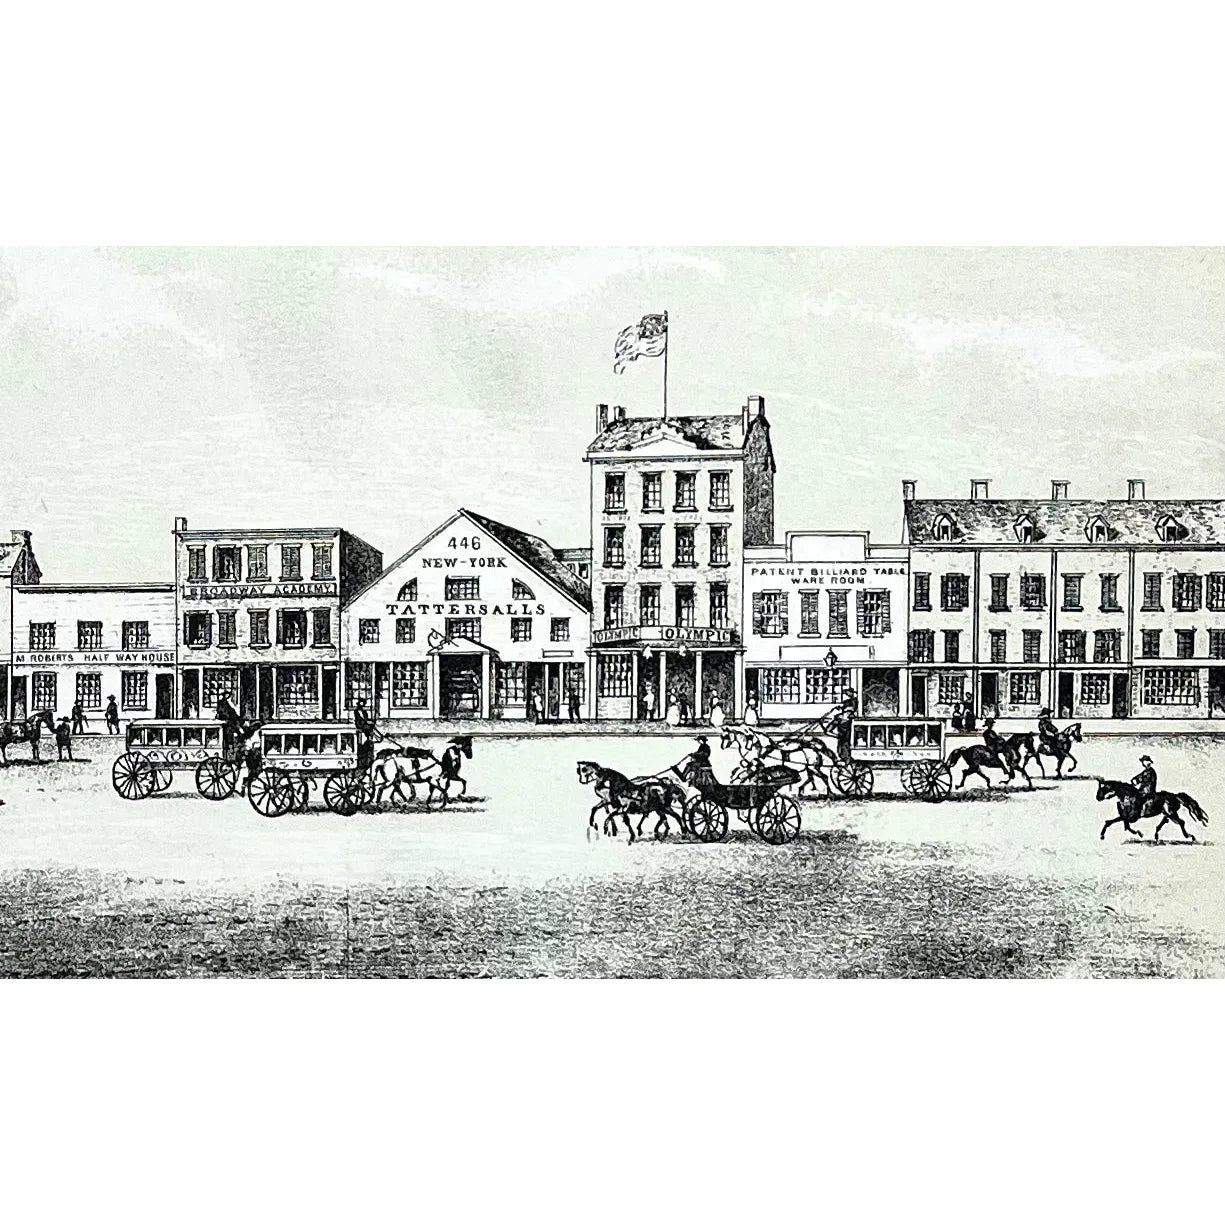 Original antique print of Broadway In New York from the 1840s at Howard and Grand Streets, showing Broadway Academy, Rondon’s, Harrington, Tattersall, Hayward, Patent Billiard, Roberts Halfway House, Olympic and Pearl with Horse and Buggies roaming the streets.